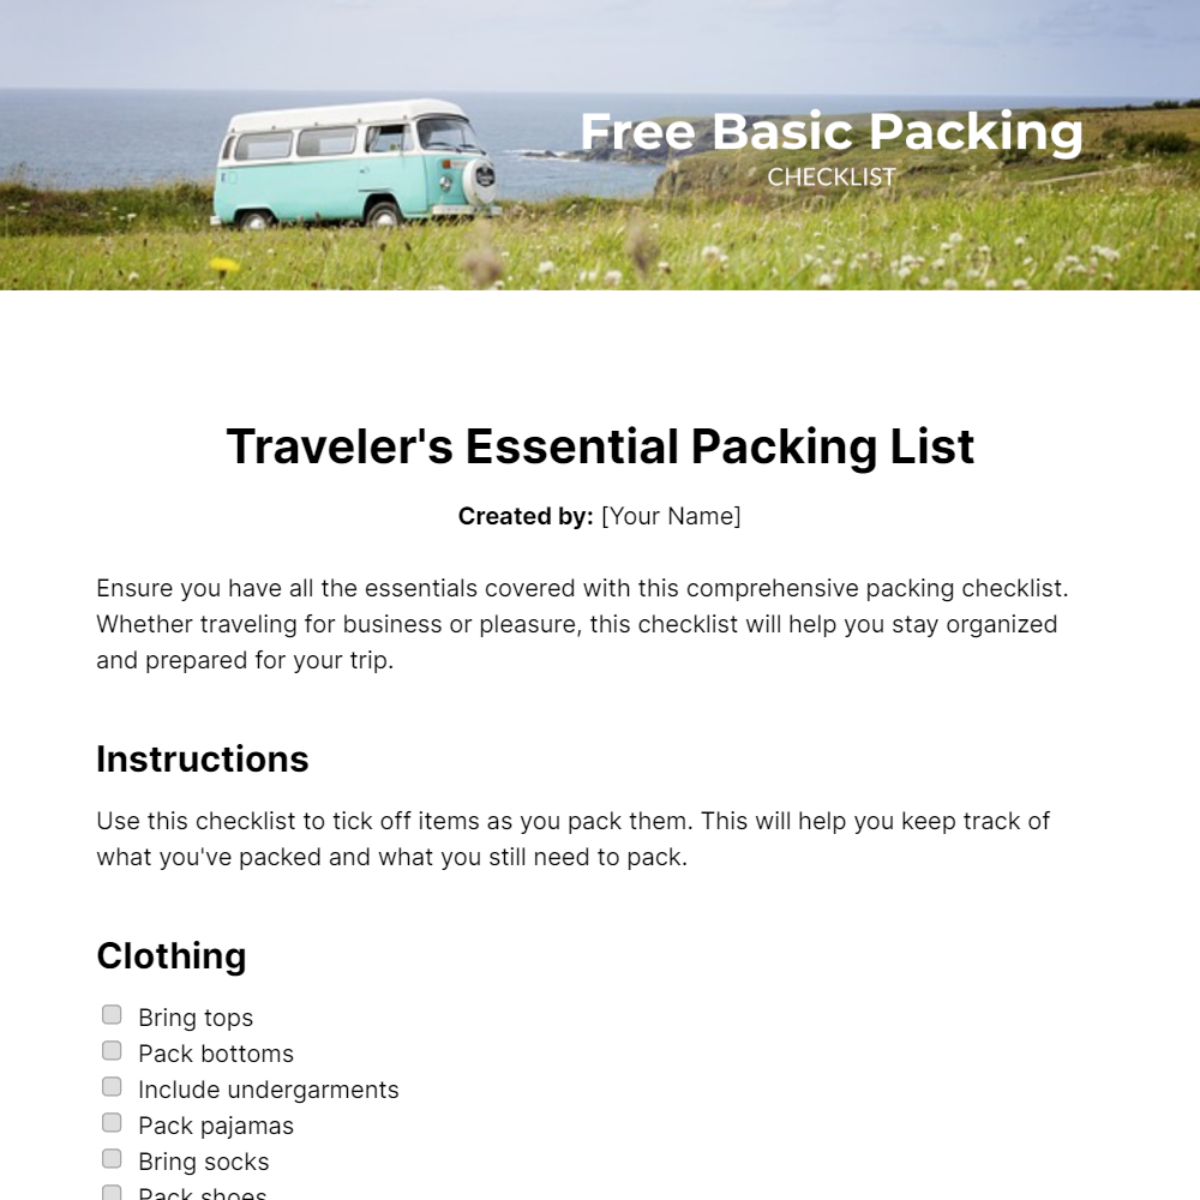 Basic Packing Checklist Template